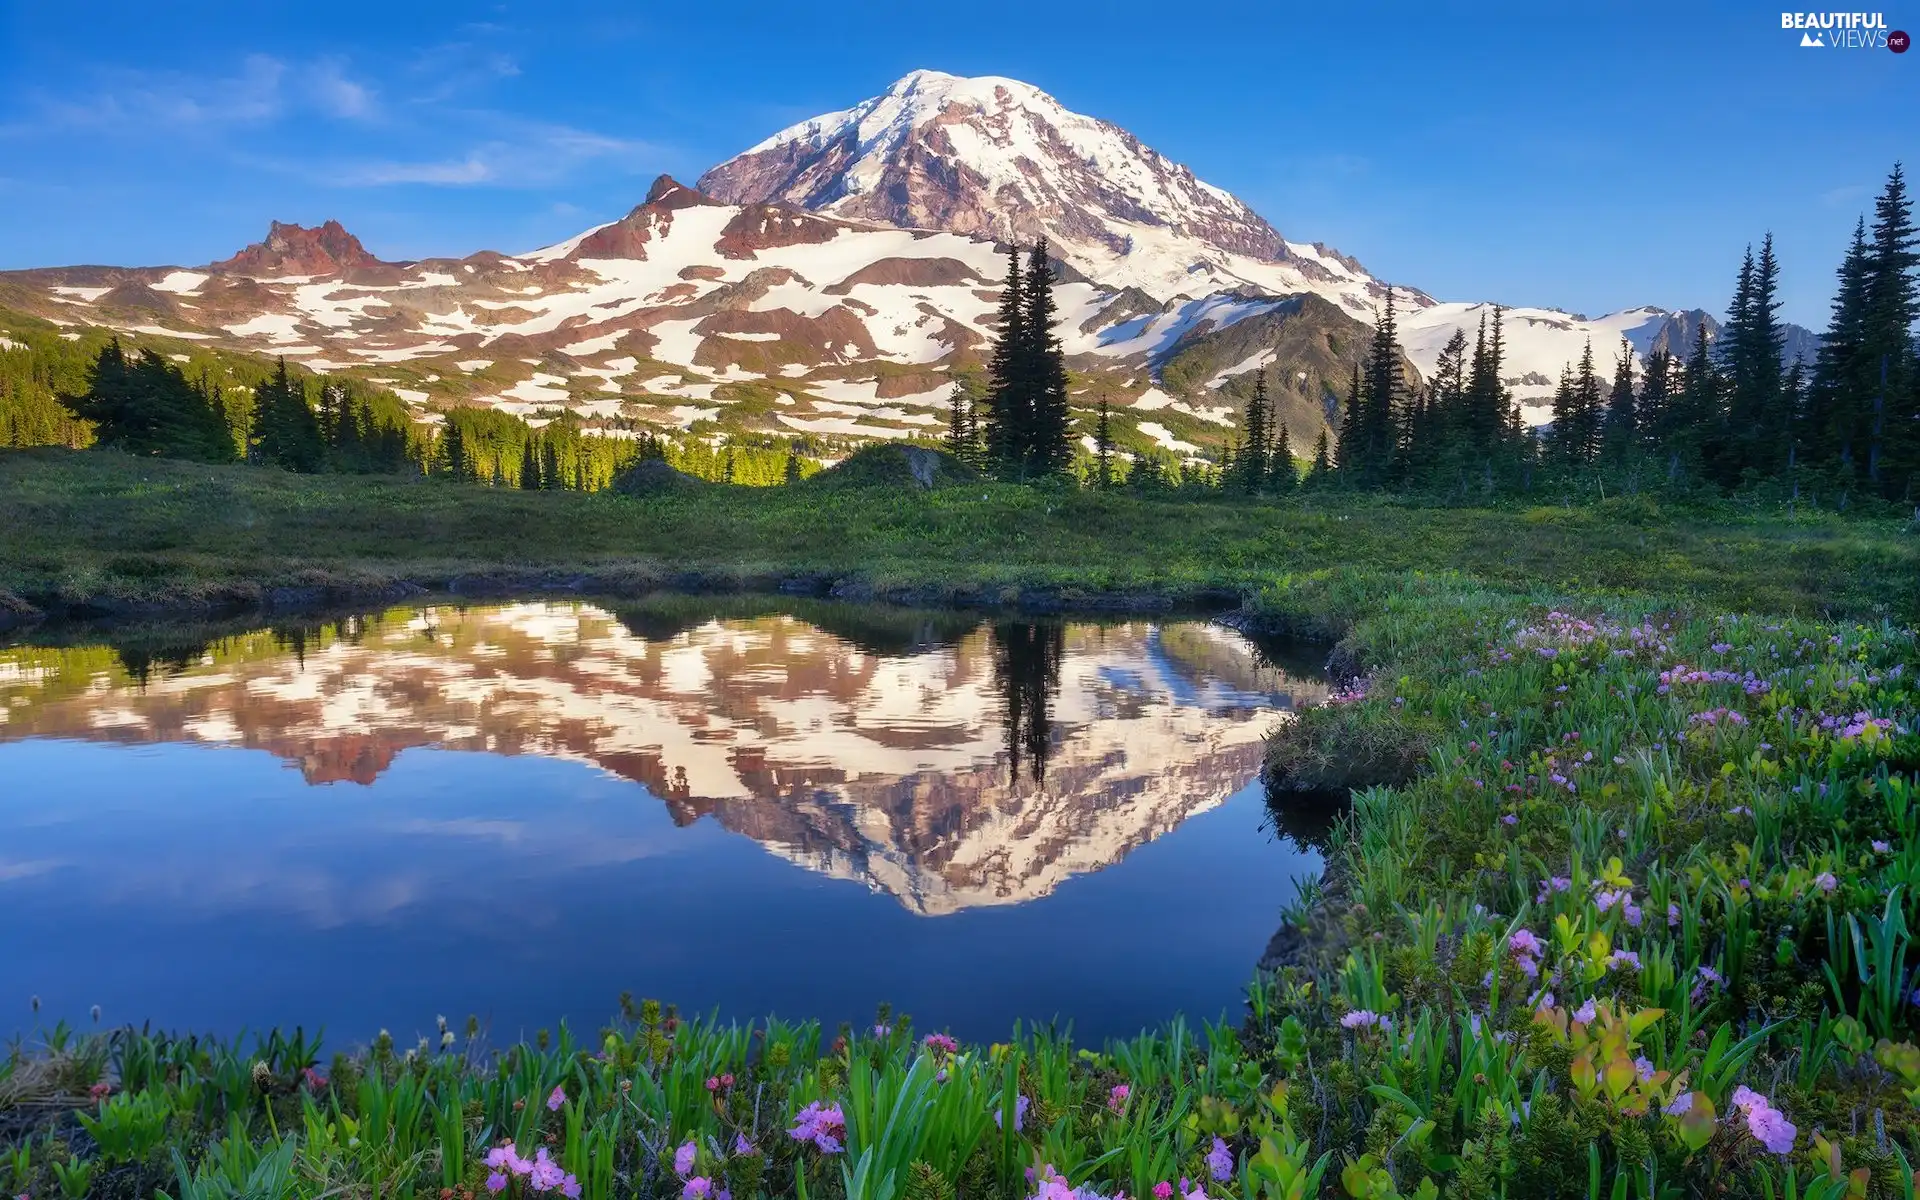 puddle, Washington State, Stratovolcano Mount Rainier, viewes, Meadow, The United States, Mount Rainier National Park, Mountains, trees, Flowers